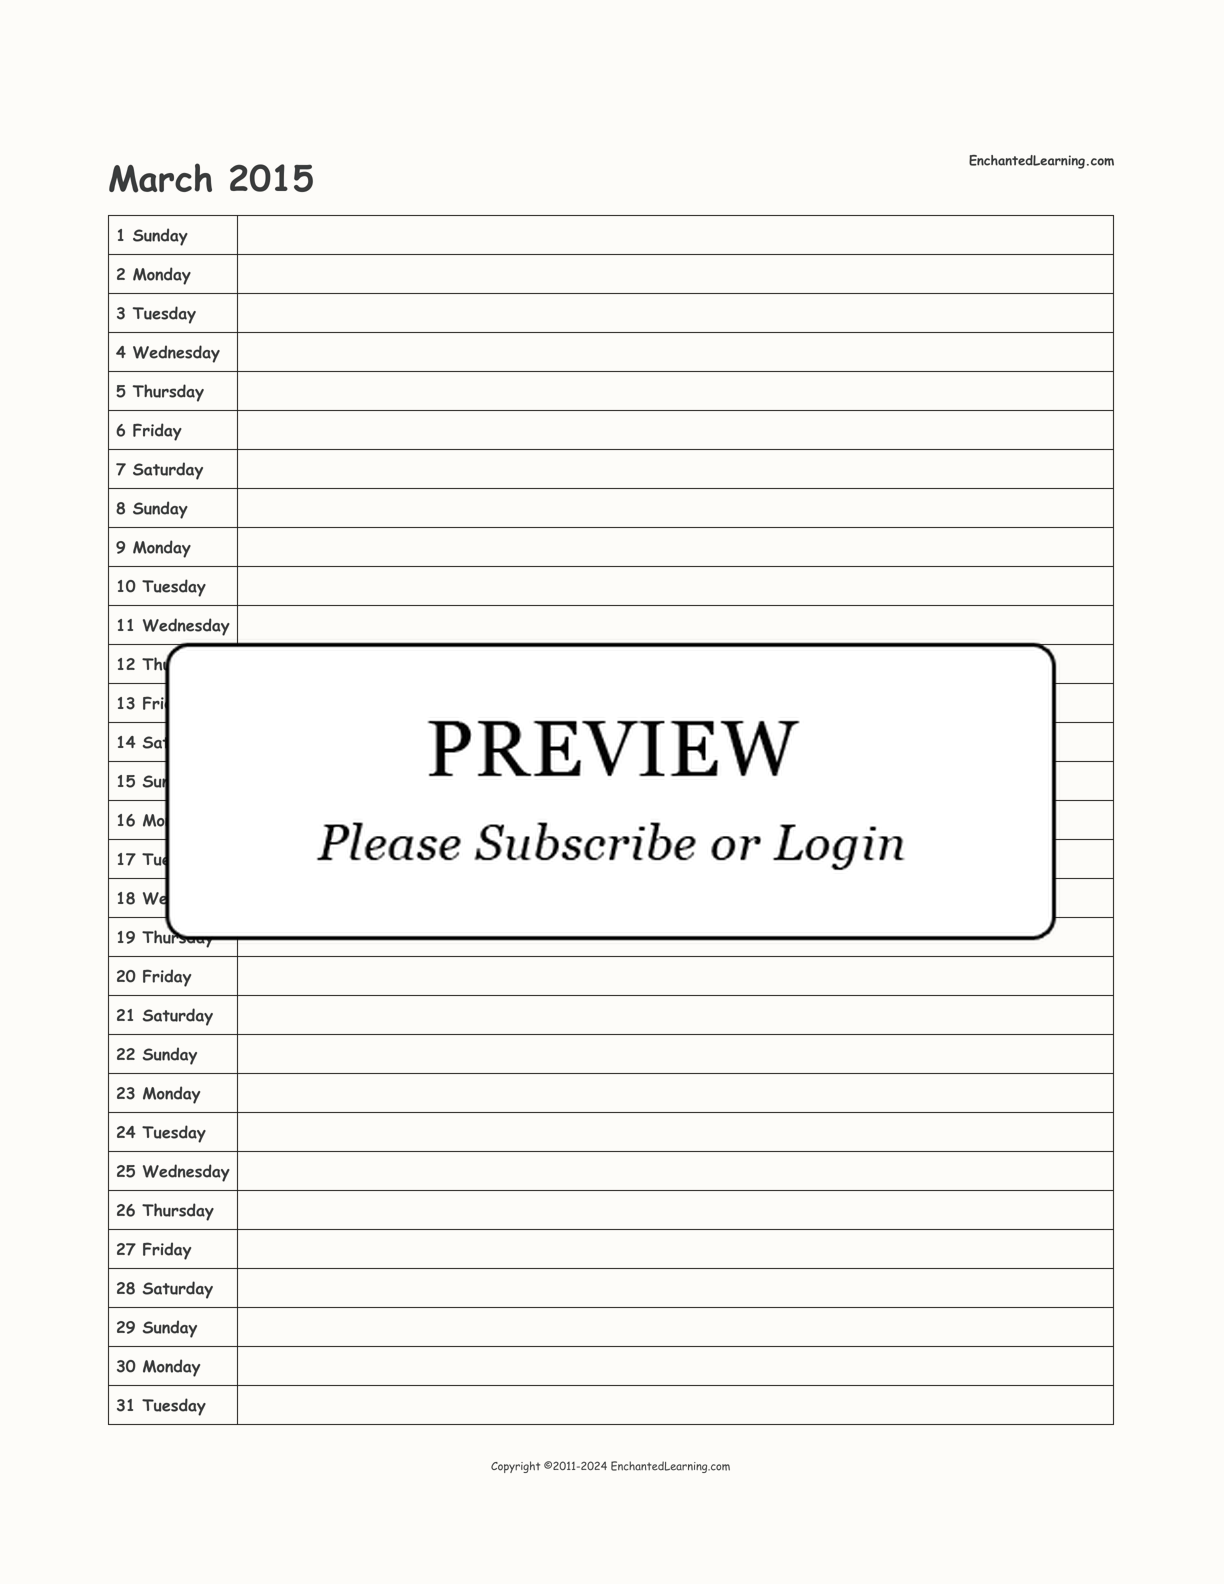 2015 Scheduling Calendar interactive printout page 3